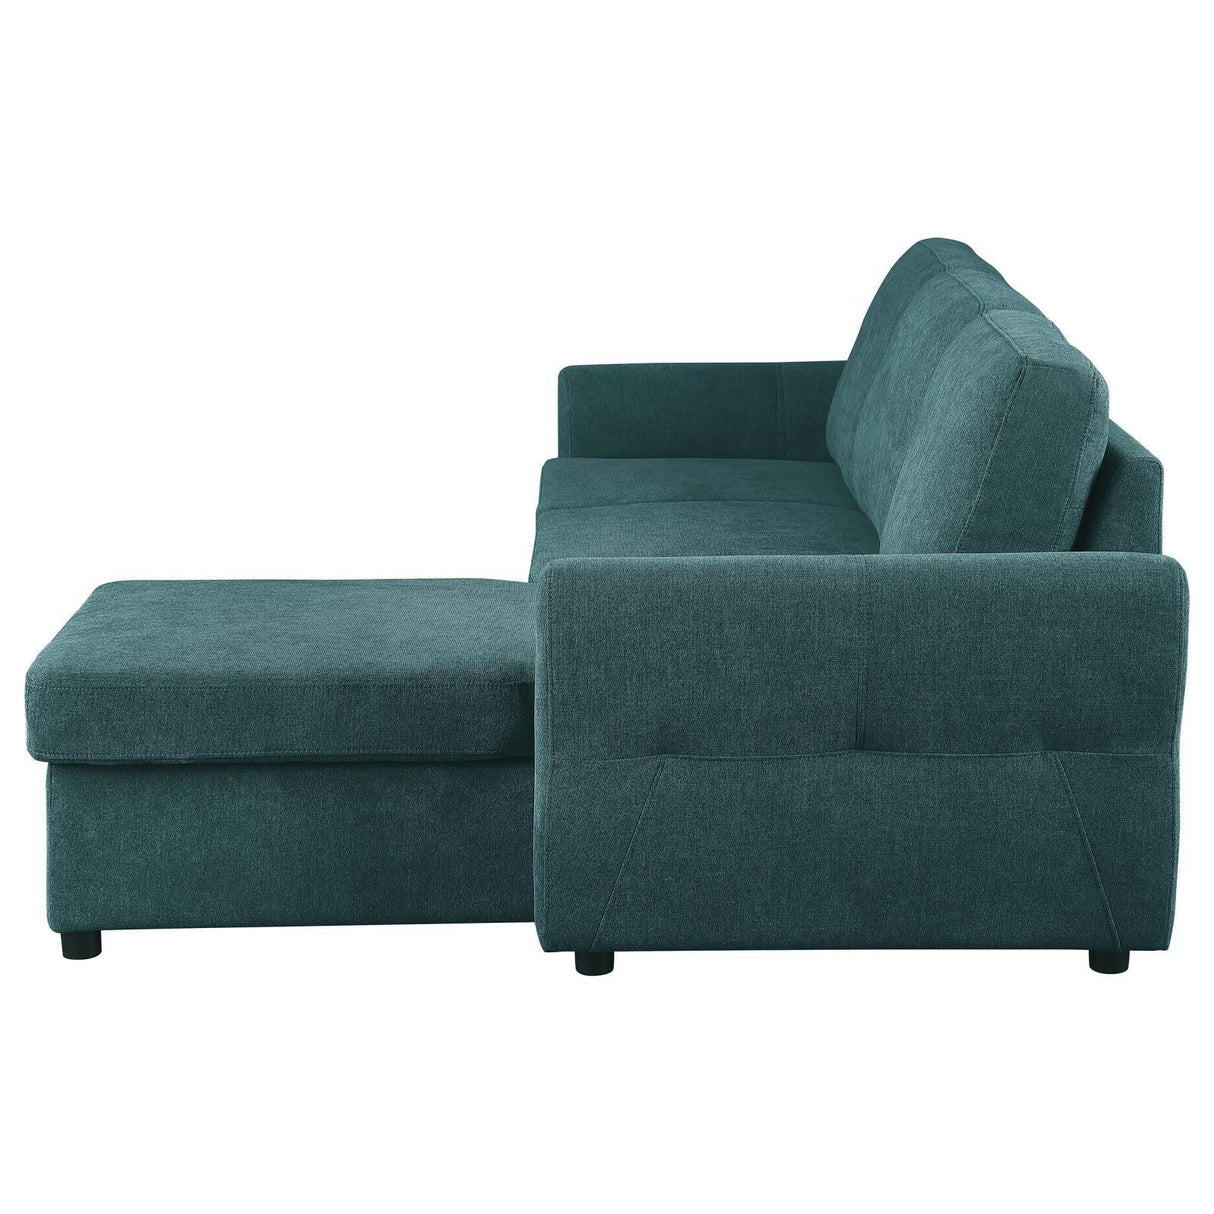 Samantha Upholstered Sleeper Sofa Sectional With Storage Chaise Teal Blue 511087 - Ella Furniture